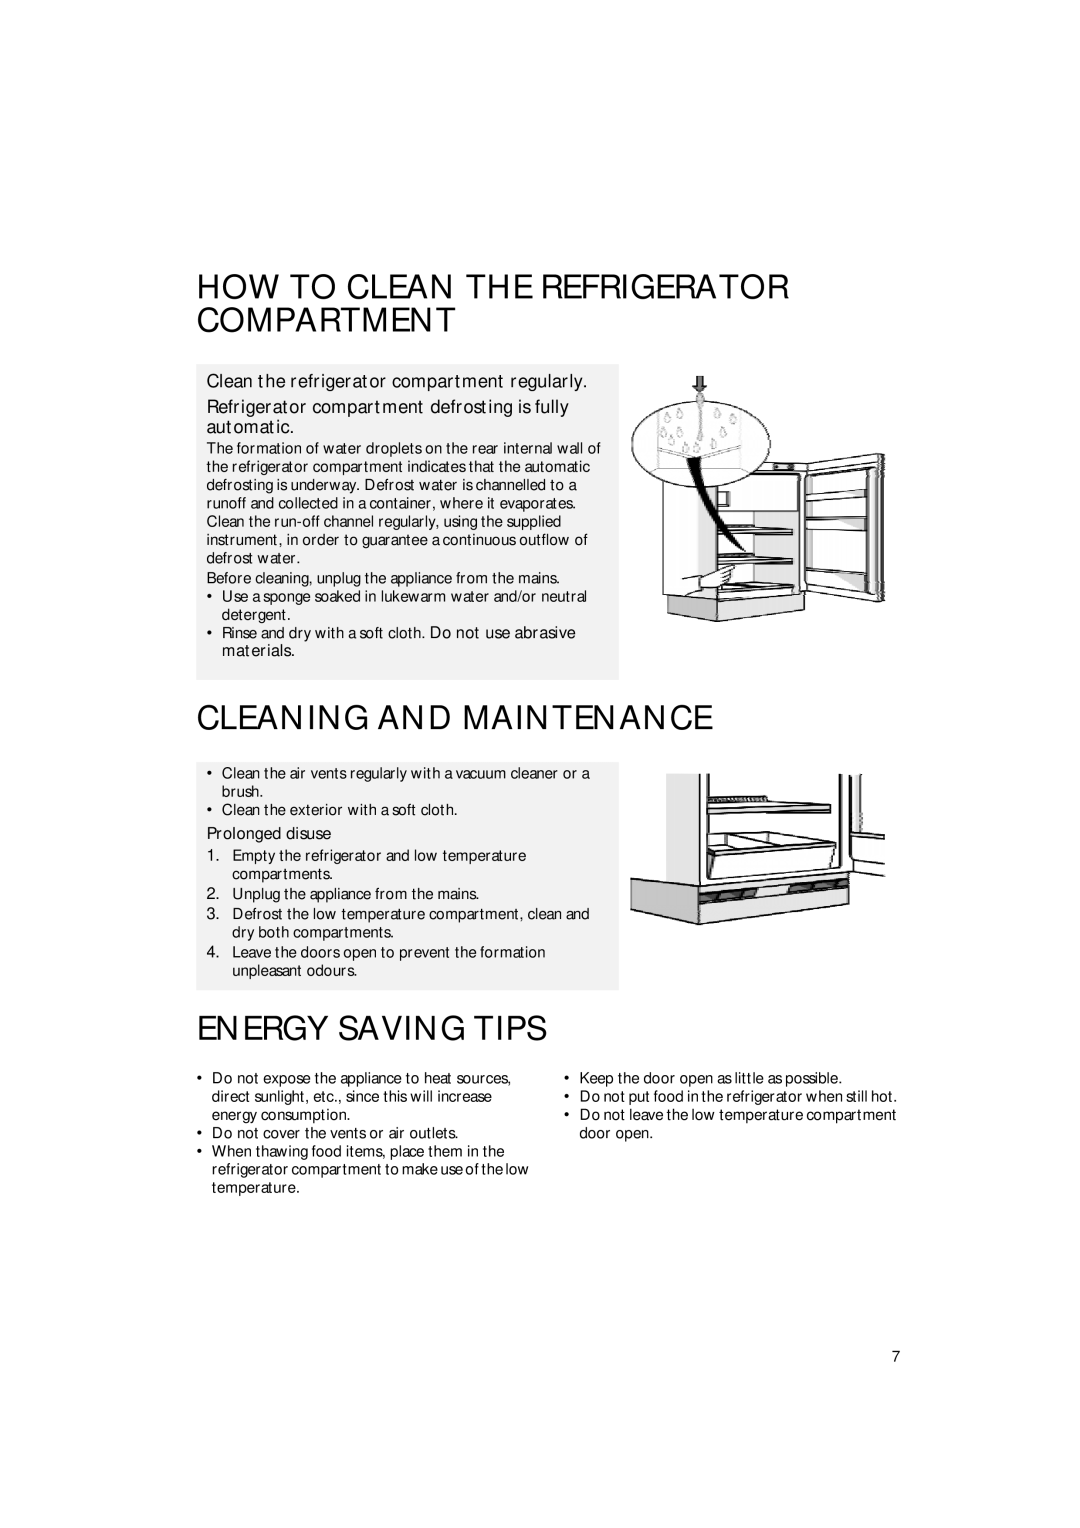 CDA FW350 manual How To Clean The Refrigerator Compartment, Cleaning And Maintenance, Energy Saving Tips 